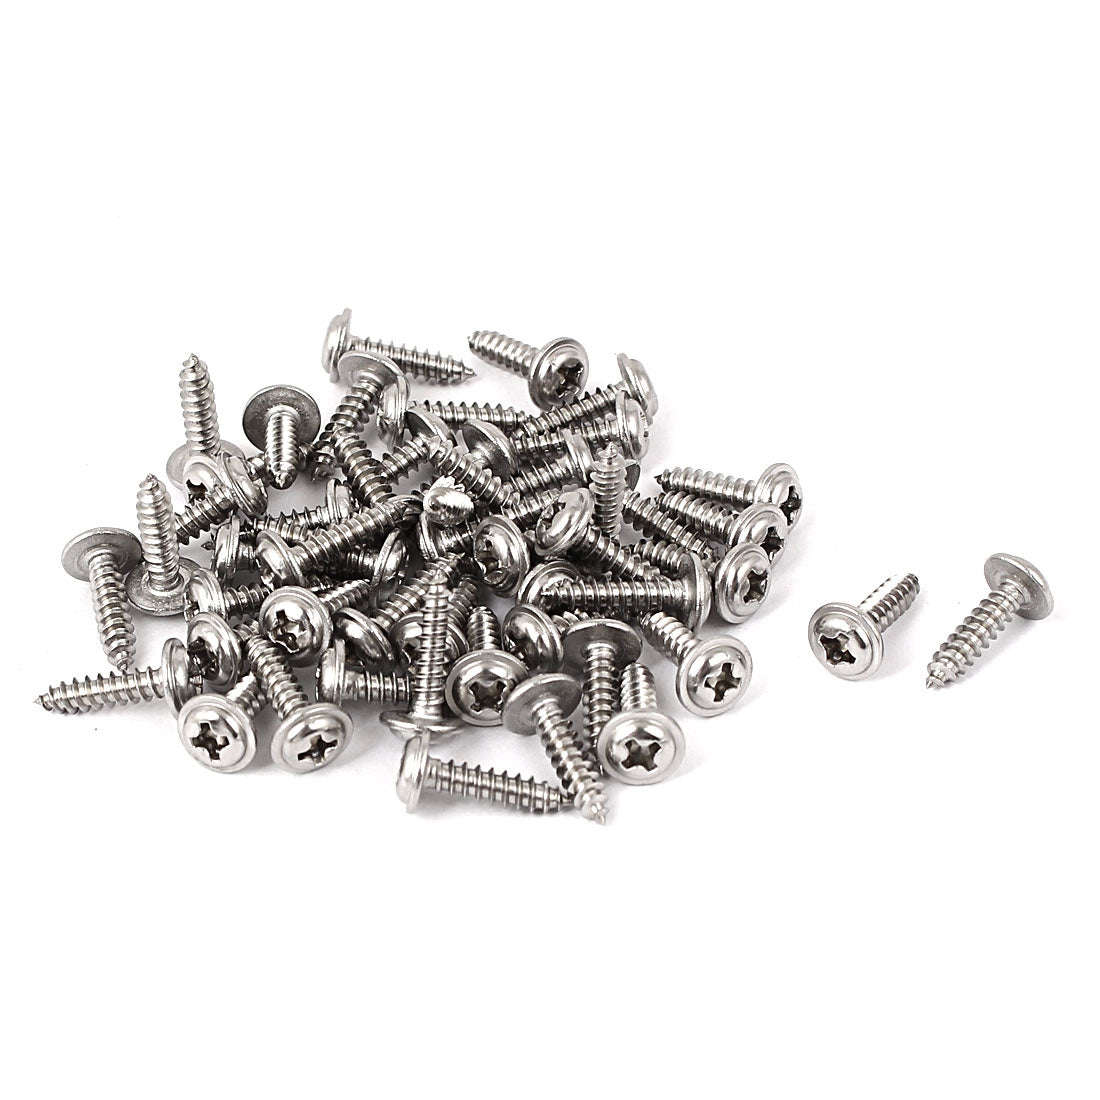 uxcell Uxcell 3mmx12mm Stainless Steel Phillips Flat  Sheet Self Tapping Screws 50 Pcs